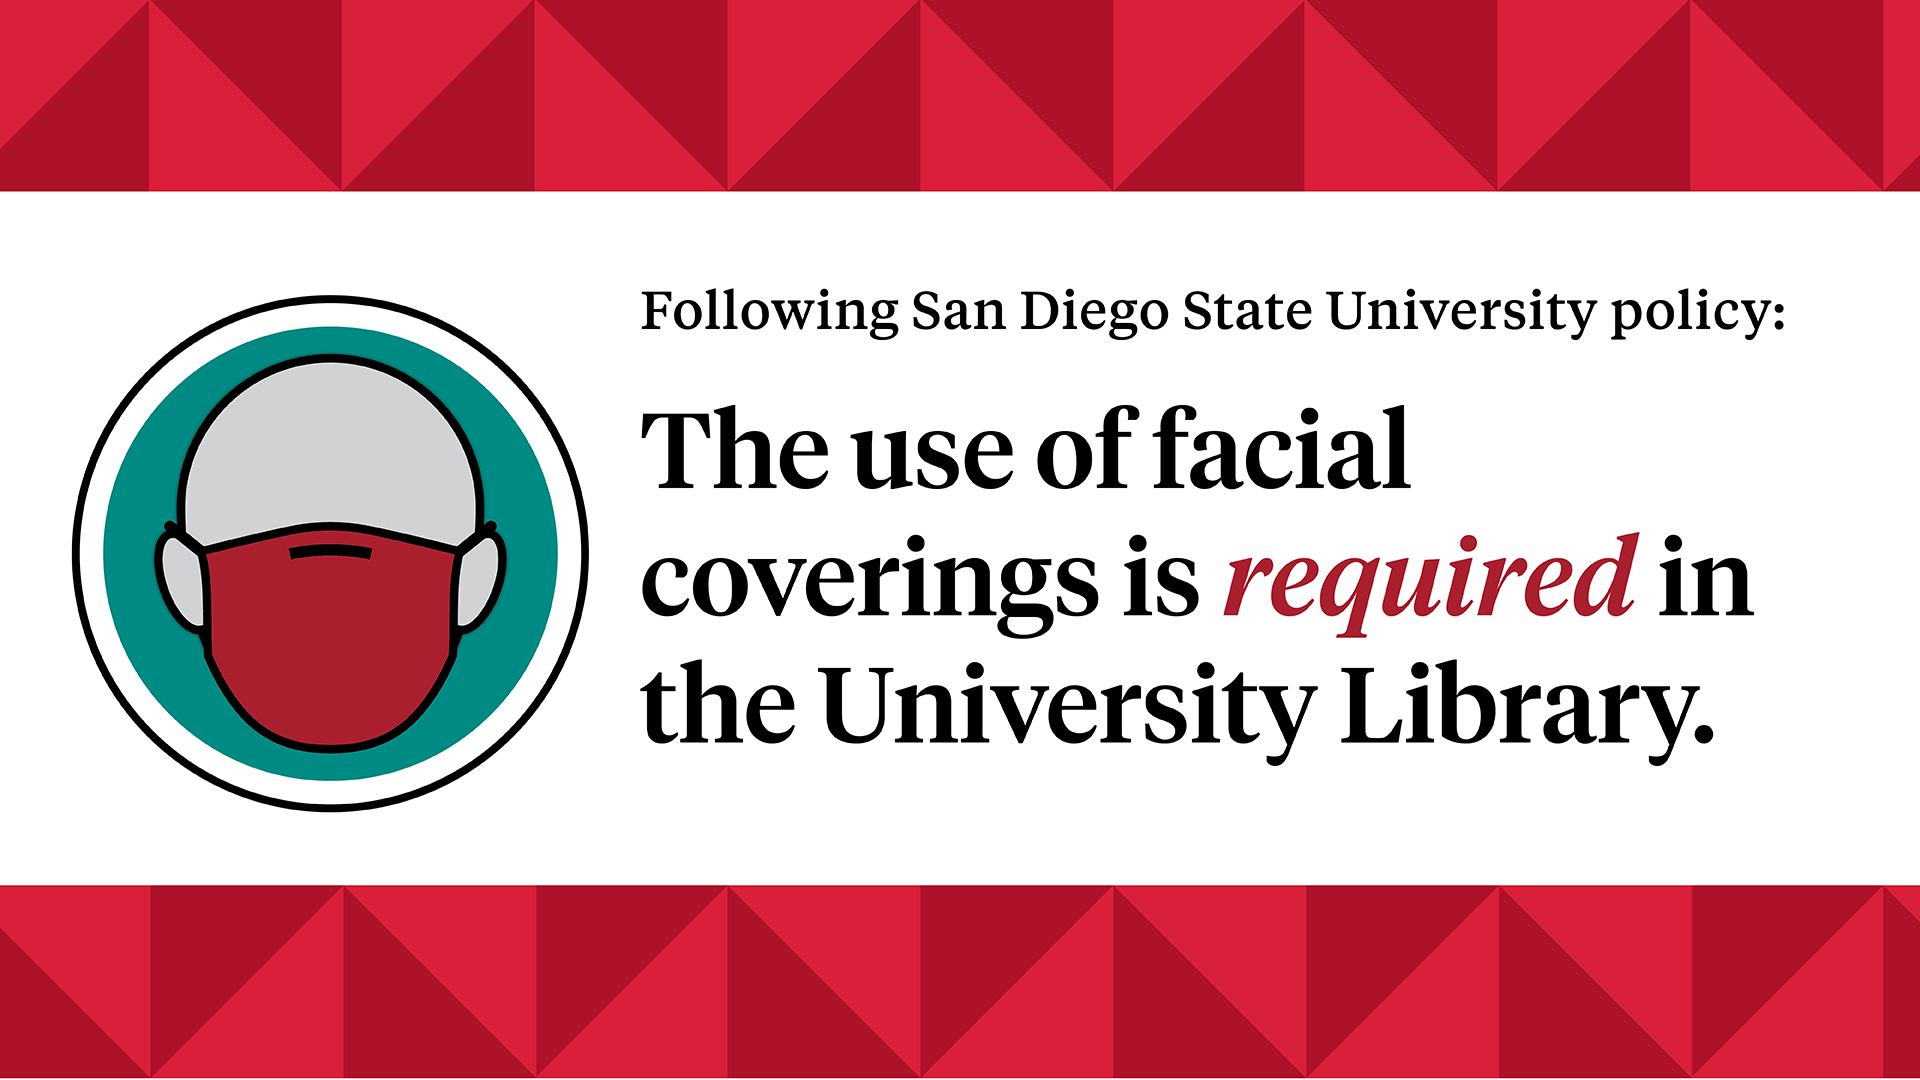 Facial coverings are required